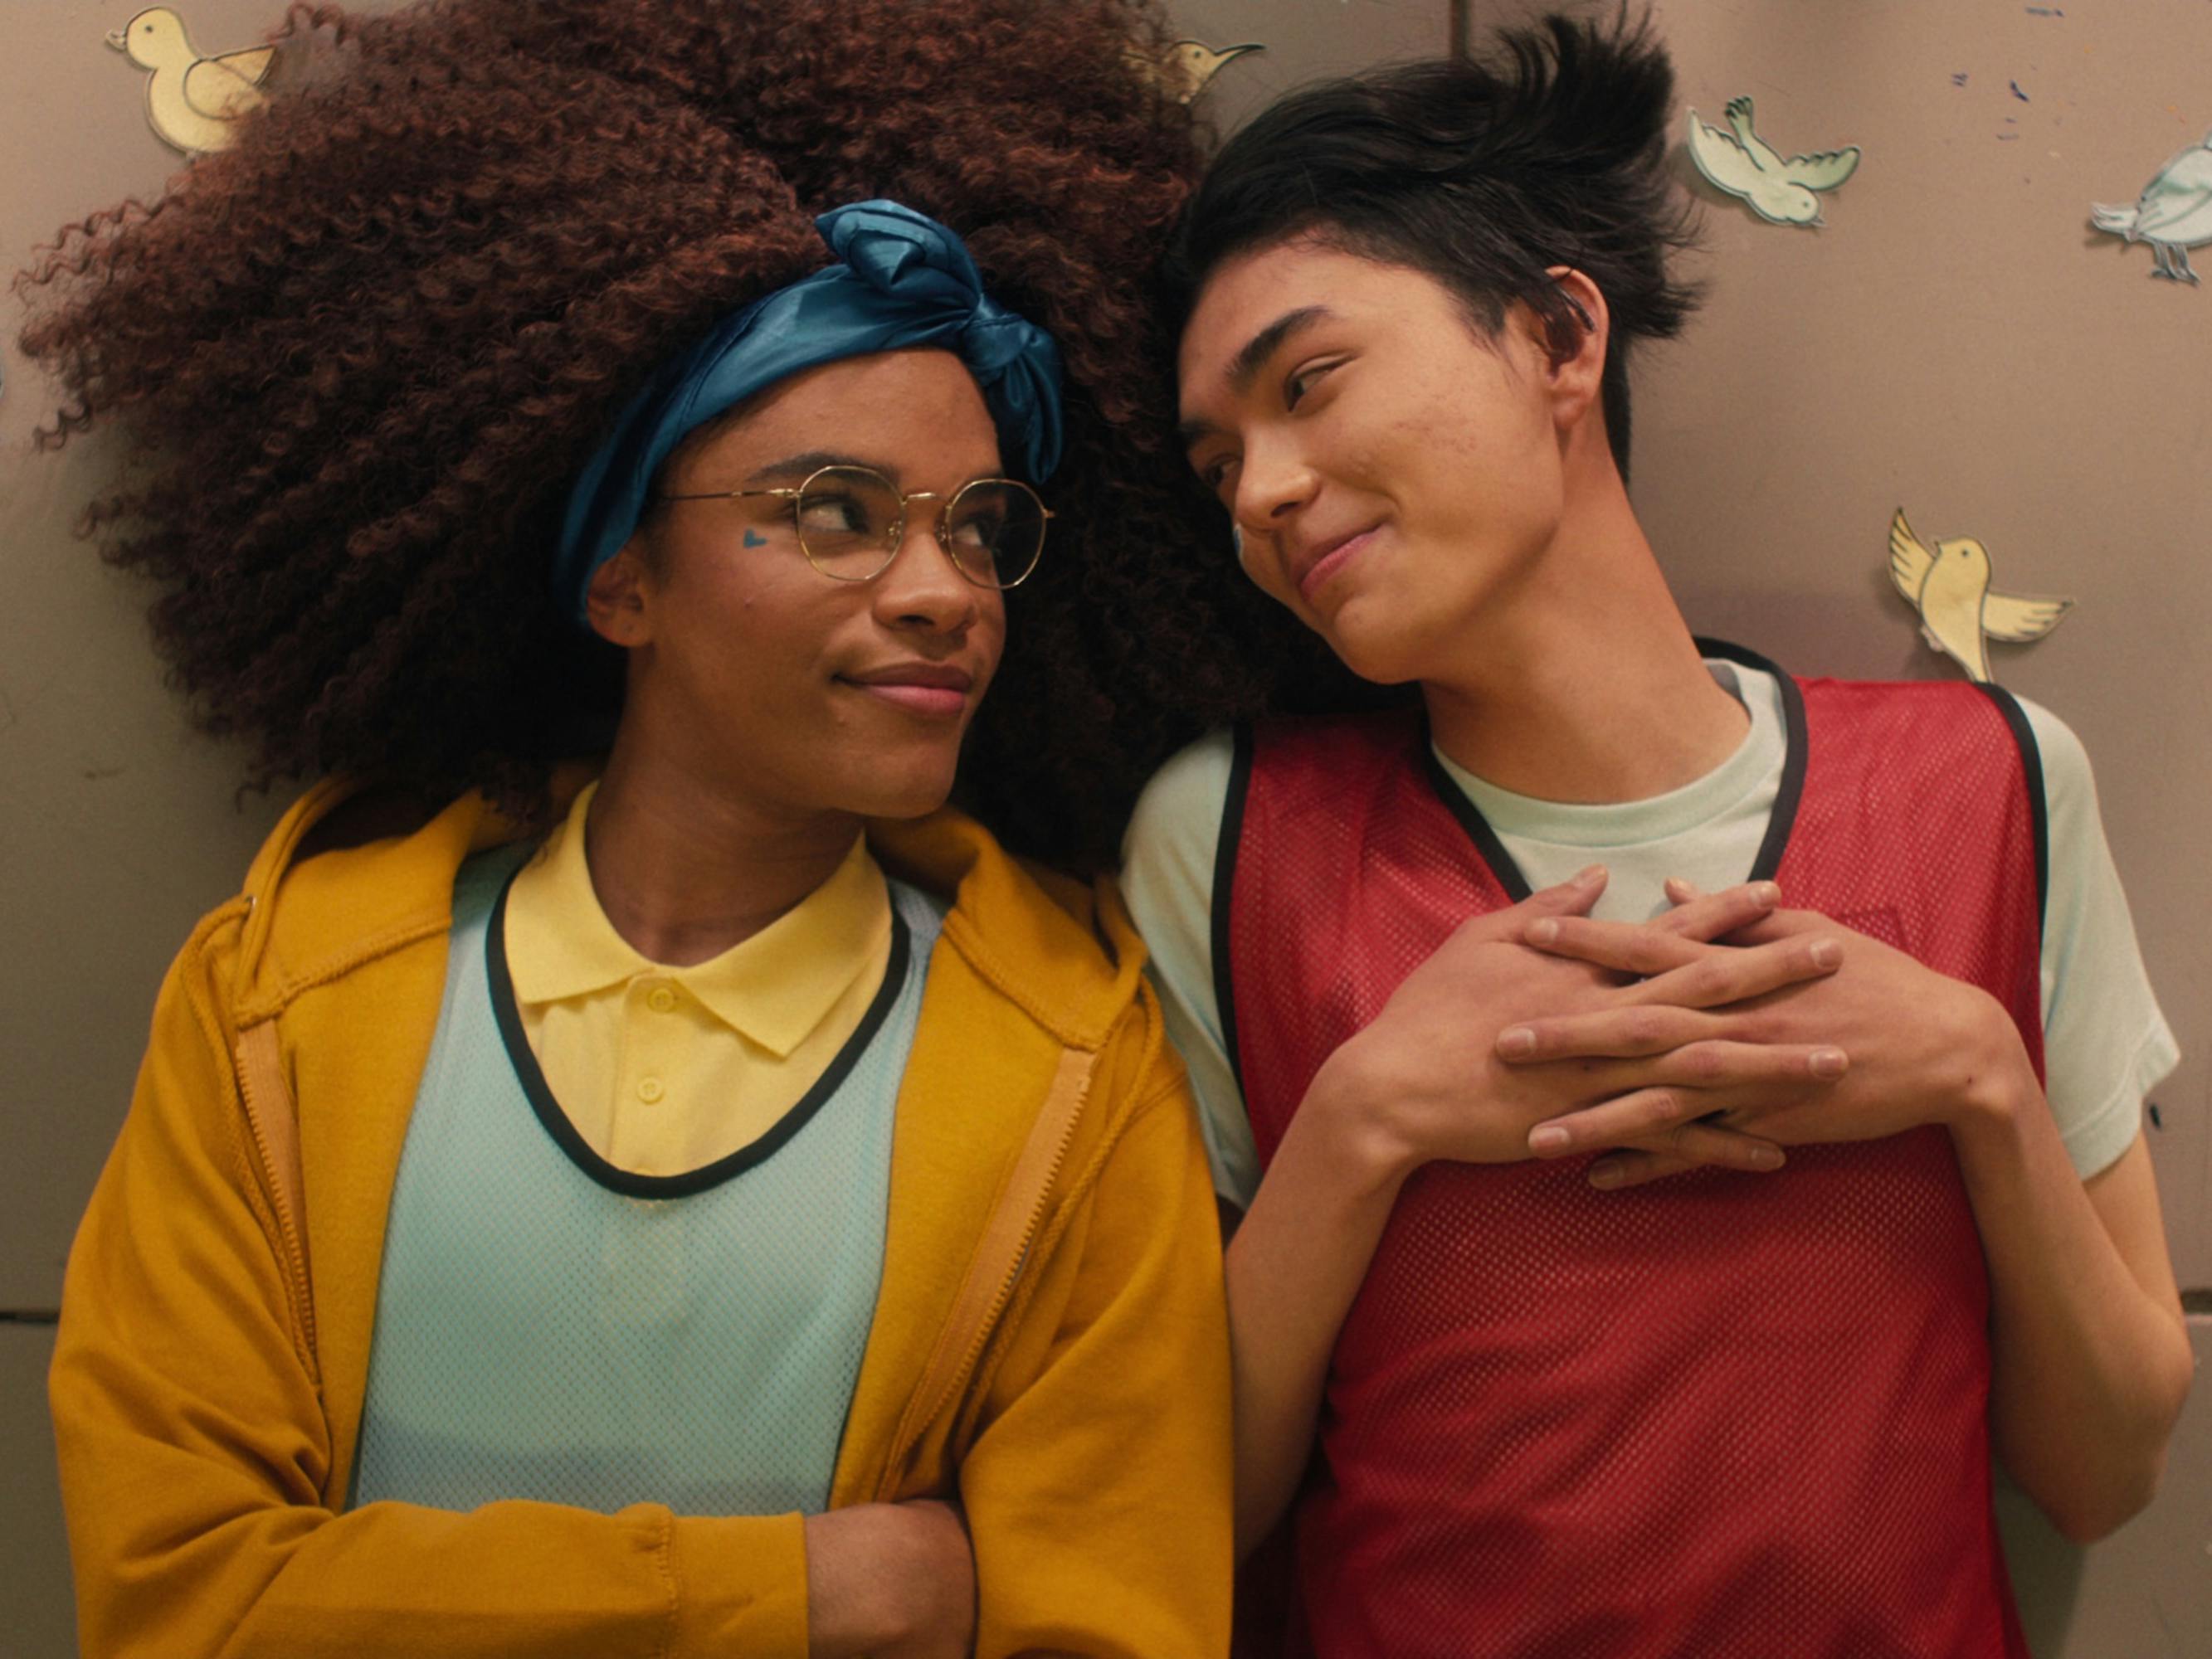 Elle (Yasmin Finney) and Tao Xu (William Gao) lie on the ground and look at each other lovingly. She wears a yellow hoodie and blue headband and he wears a red pinny.